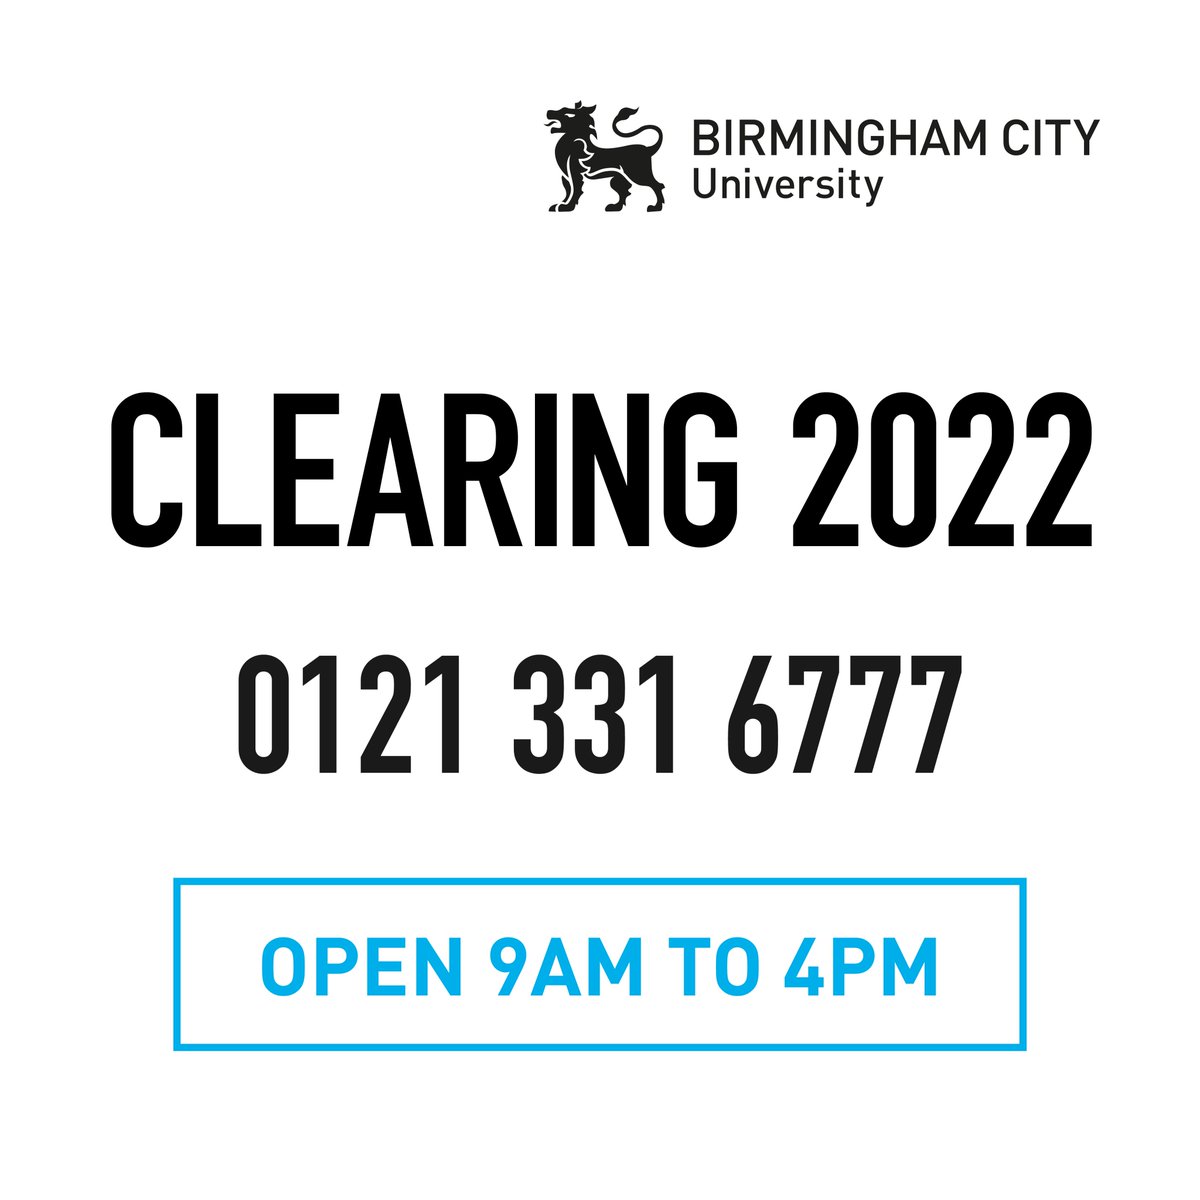 Our friendly clearing advisors are here for you all weekend! Whether you've changed your mind, didn't get the results you expected, or want to try something new, give us a call to discuss your options. 🤩 Call 0121 331 6777 #Clearing2022